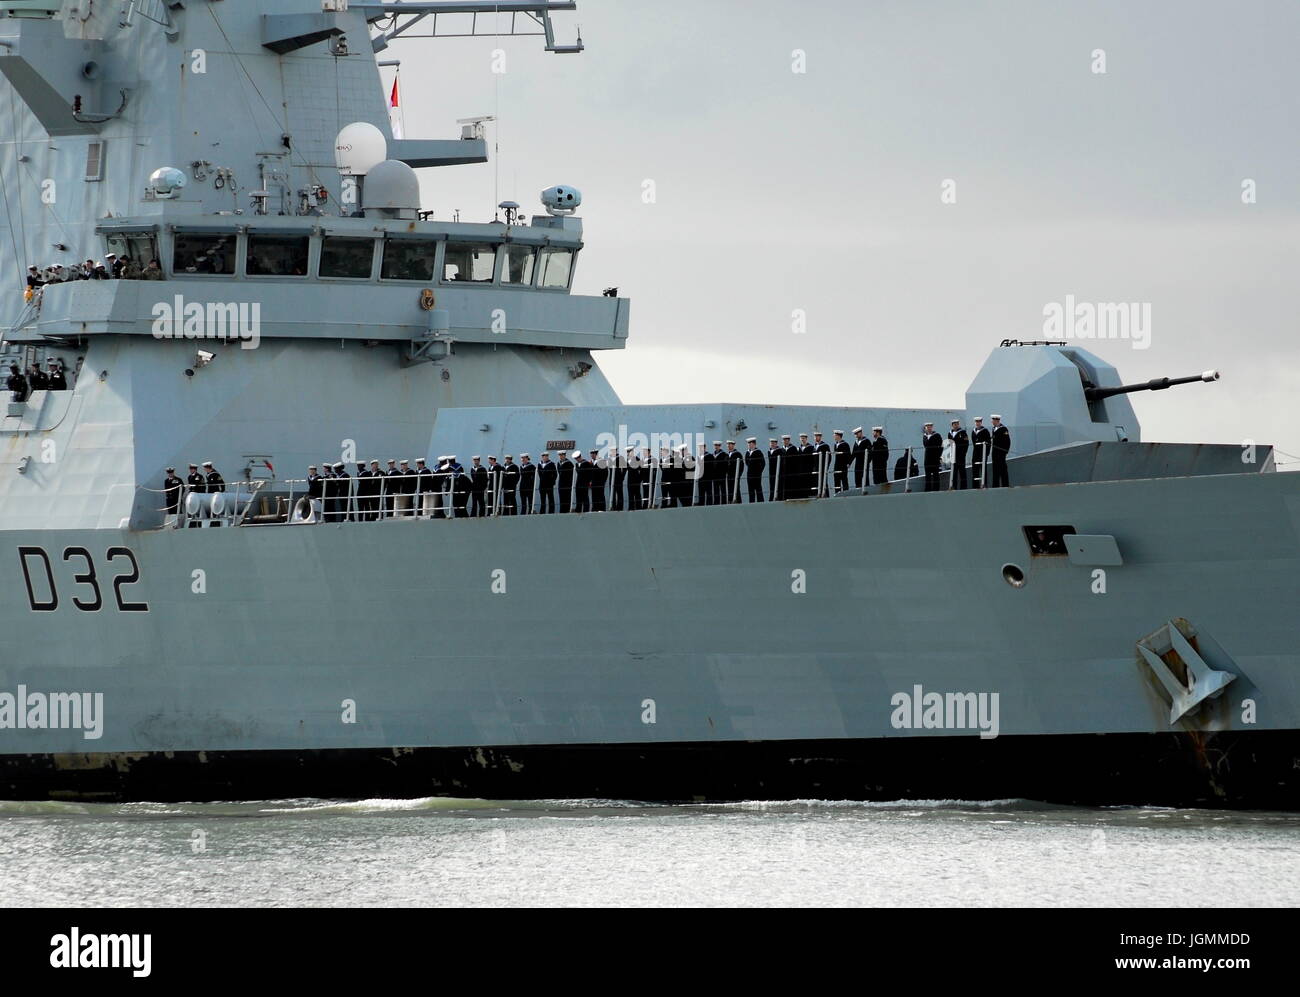 AJAXNETPHOTO. 28TH FEBRUARY, 2014. PORTSMOUTH, ENGLAND. - DESTROYER RETURNS - TYPE 45 HMS DARING ENTERING THE NAVAL BASE TODAY. PHOTO:TONY HOLLAND/AJAX REF:DTH142802 7275 Stock Photo